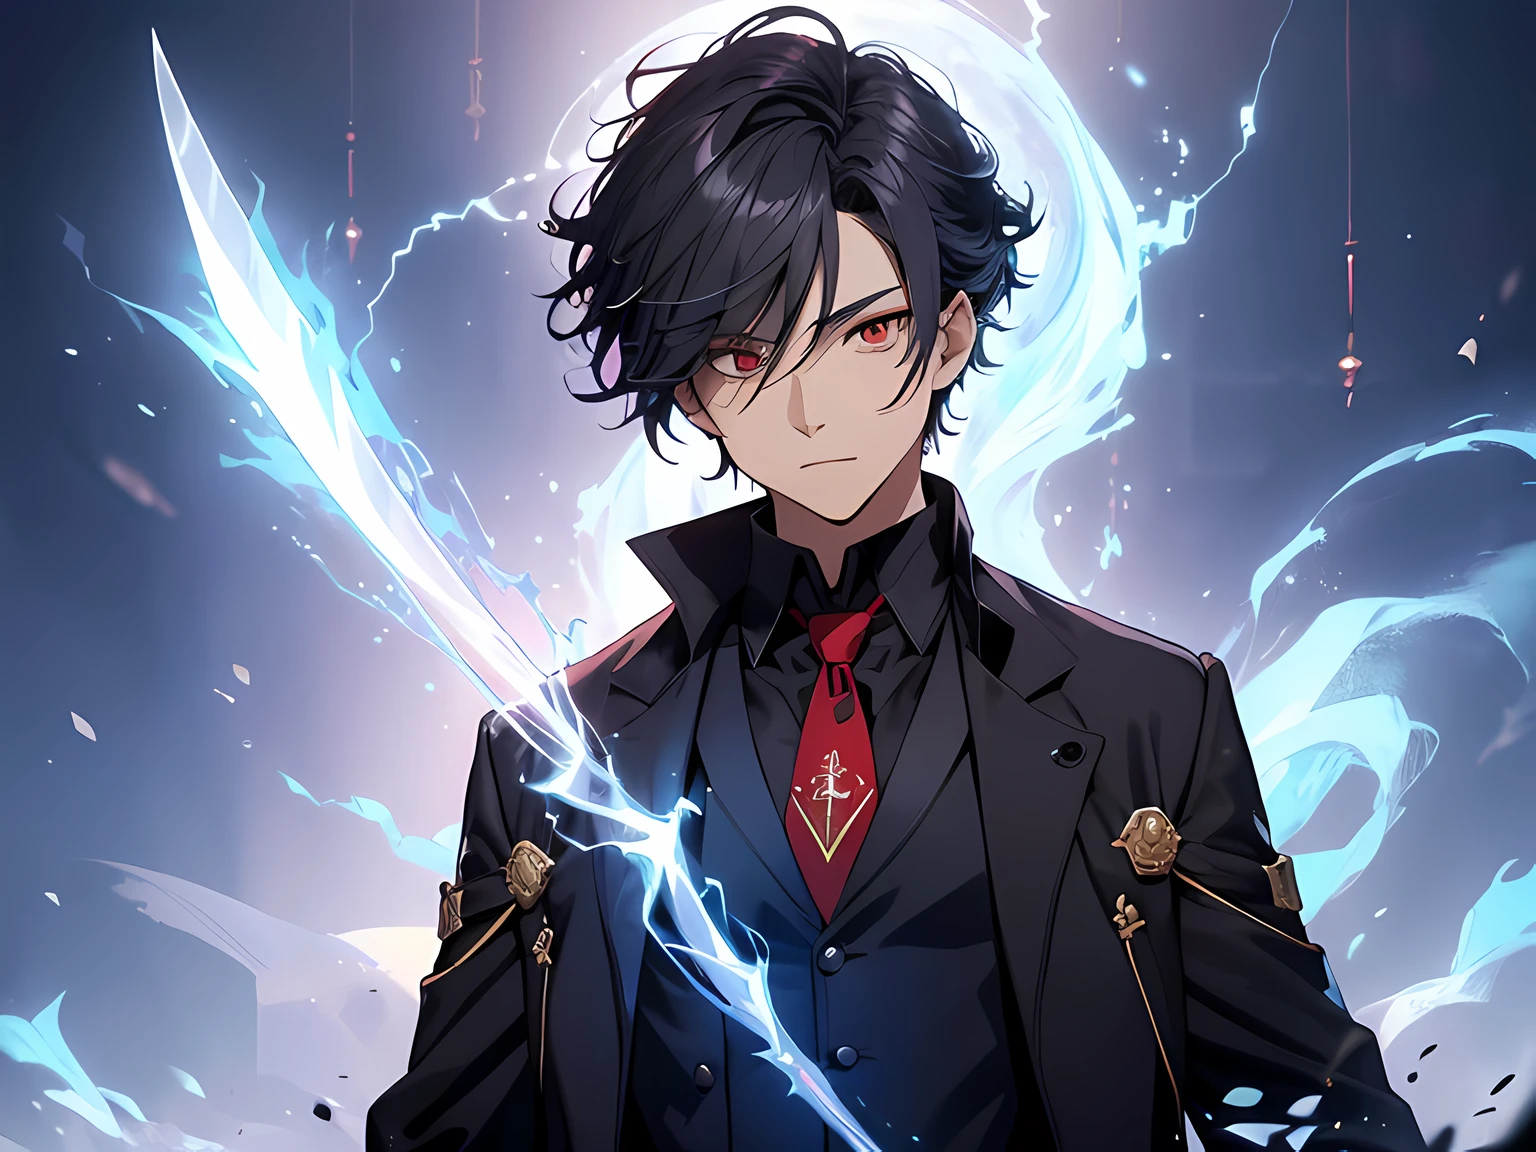 (ultra-detailed, perfect pixel, highres, best quality, beautiful eyes finely detailed), 19 years old anime boy, short raven hair, wavy hair, parted bangs, gray hair, gradient hair color, there is many blue lightning swirling around his body (transparent), showing his over power aura (dangerous and terry aura), dangerous, he holding a magical sword, magus, red eyes, long black coat, black shirt, ((neckwear, long tie)), black skirt, aristocrat, noble attire, beautiful, ethereal, elegant, prestigious, realistic fire, the background is full of magical particles and realistic blue fire. Ray tracing.